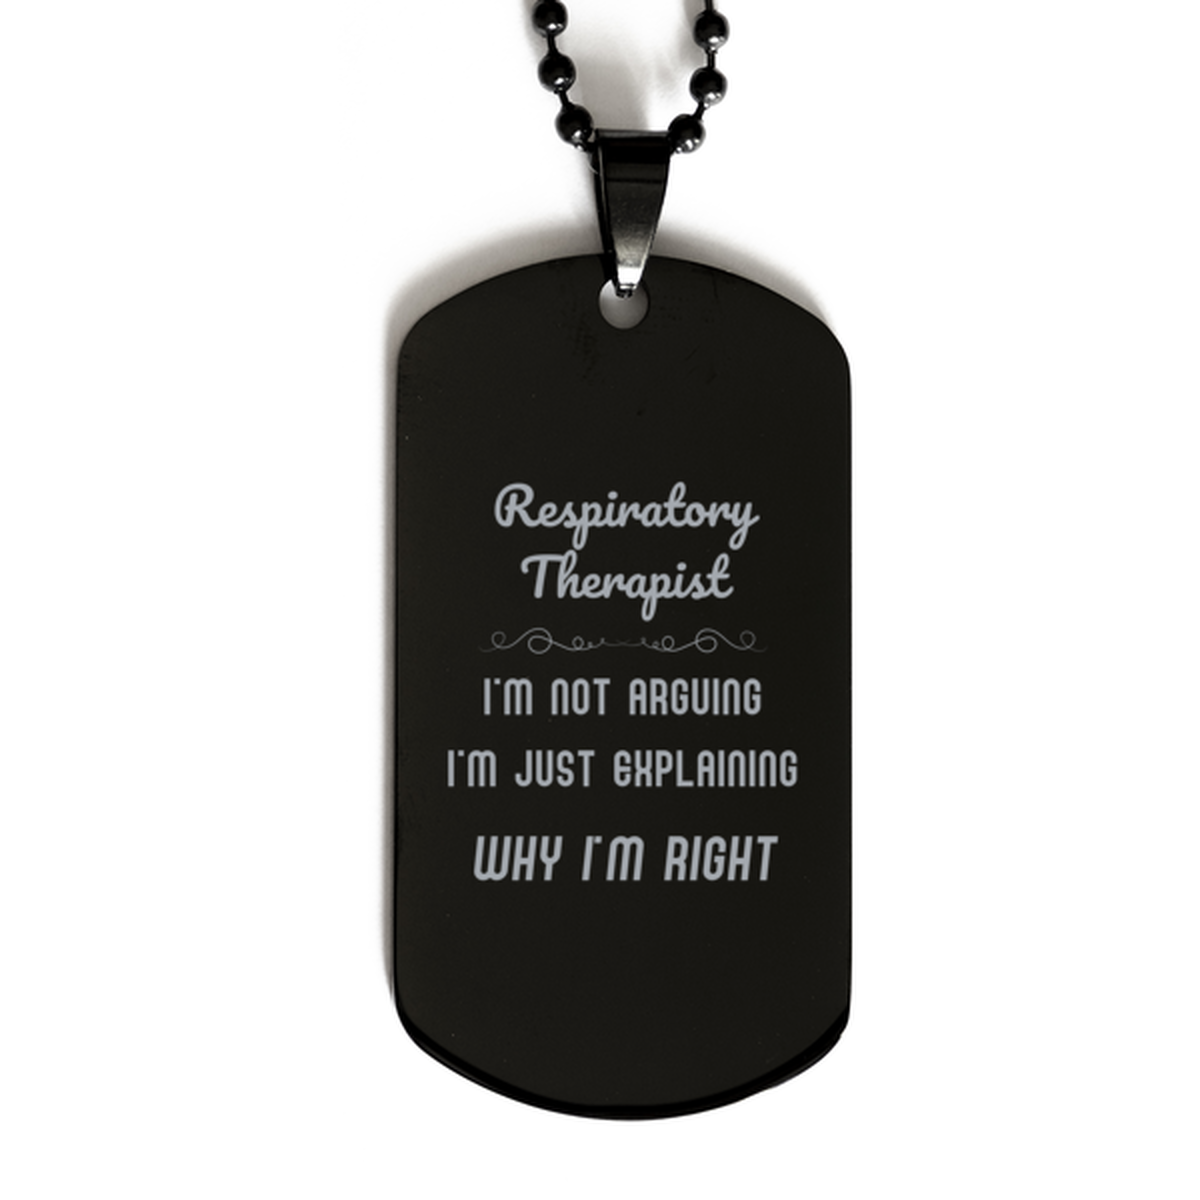 Respiratory Therapist I'm not Arguing. I'm Just Explaining Why I'm RIGHT Black Dog Tag, Funny Saying Quote Respiratory Therapist Gifts For Respiratory Therapist Graduation Birthday Christmas Gifts for Men Women Coworker